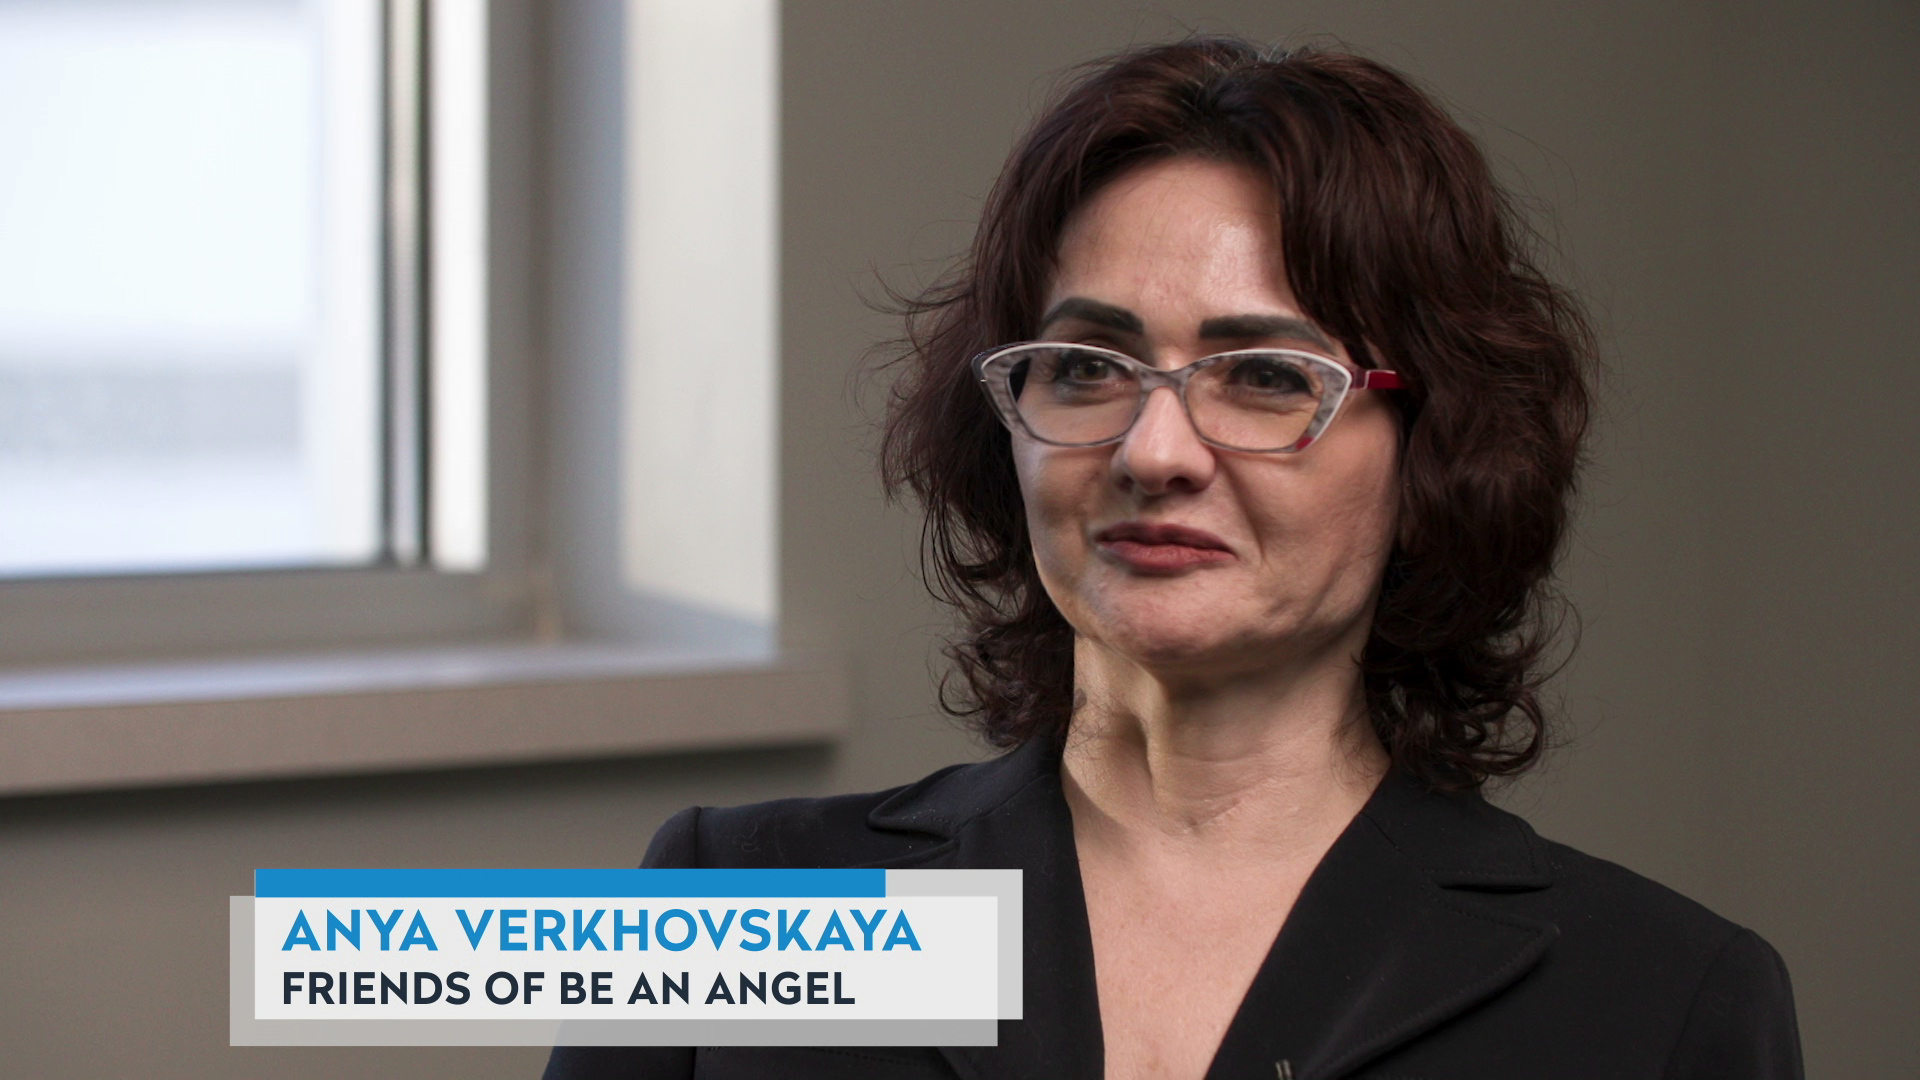 Anya Verkhovskaya sits in a room with a window behind her right shoulder, with a graphic at bottom reading "Anya Verkhovskaya" and "Friends of Be an Angel."